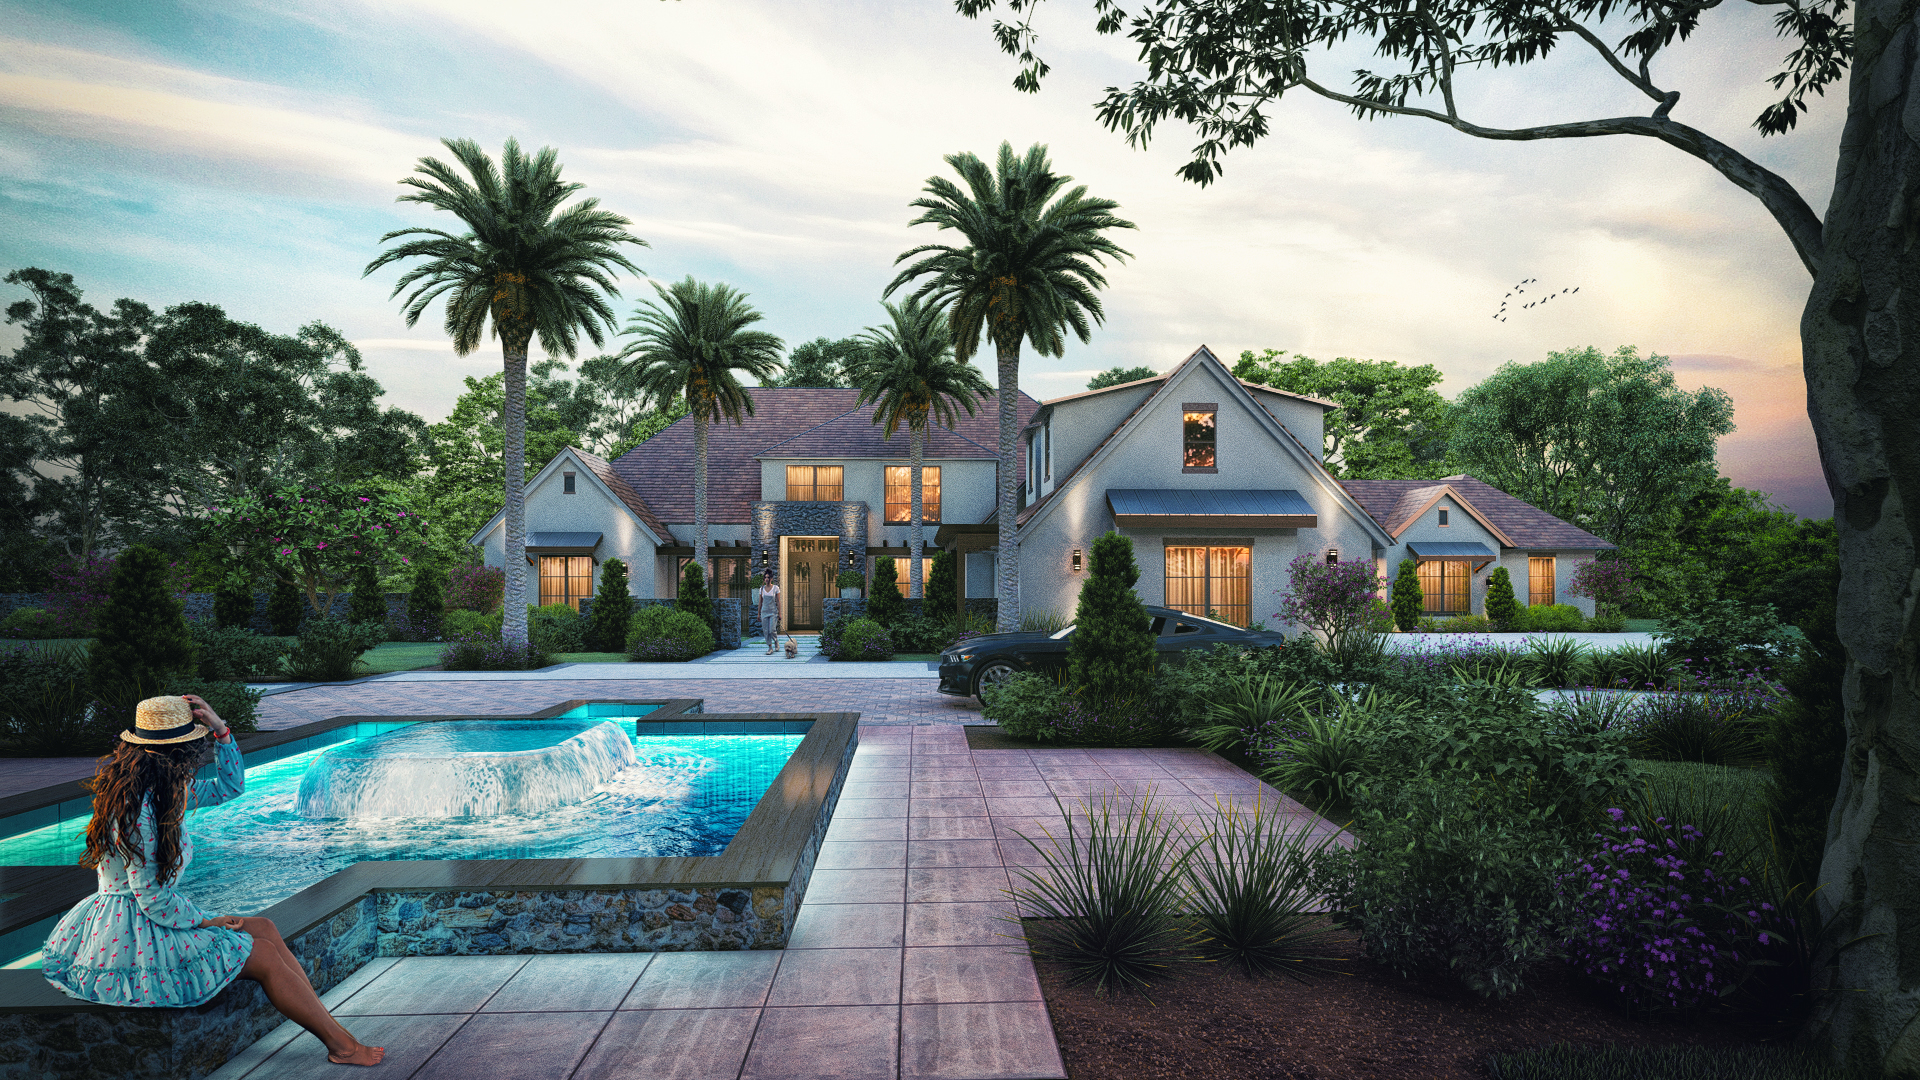 Florida Elite ​Interior – Exterior Rendering Luxury Bungalow 3D Design Idea: Poolside Opulence in the Heart of – USA